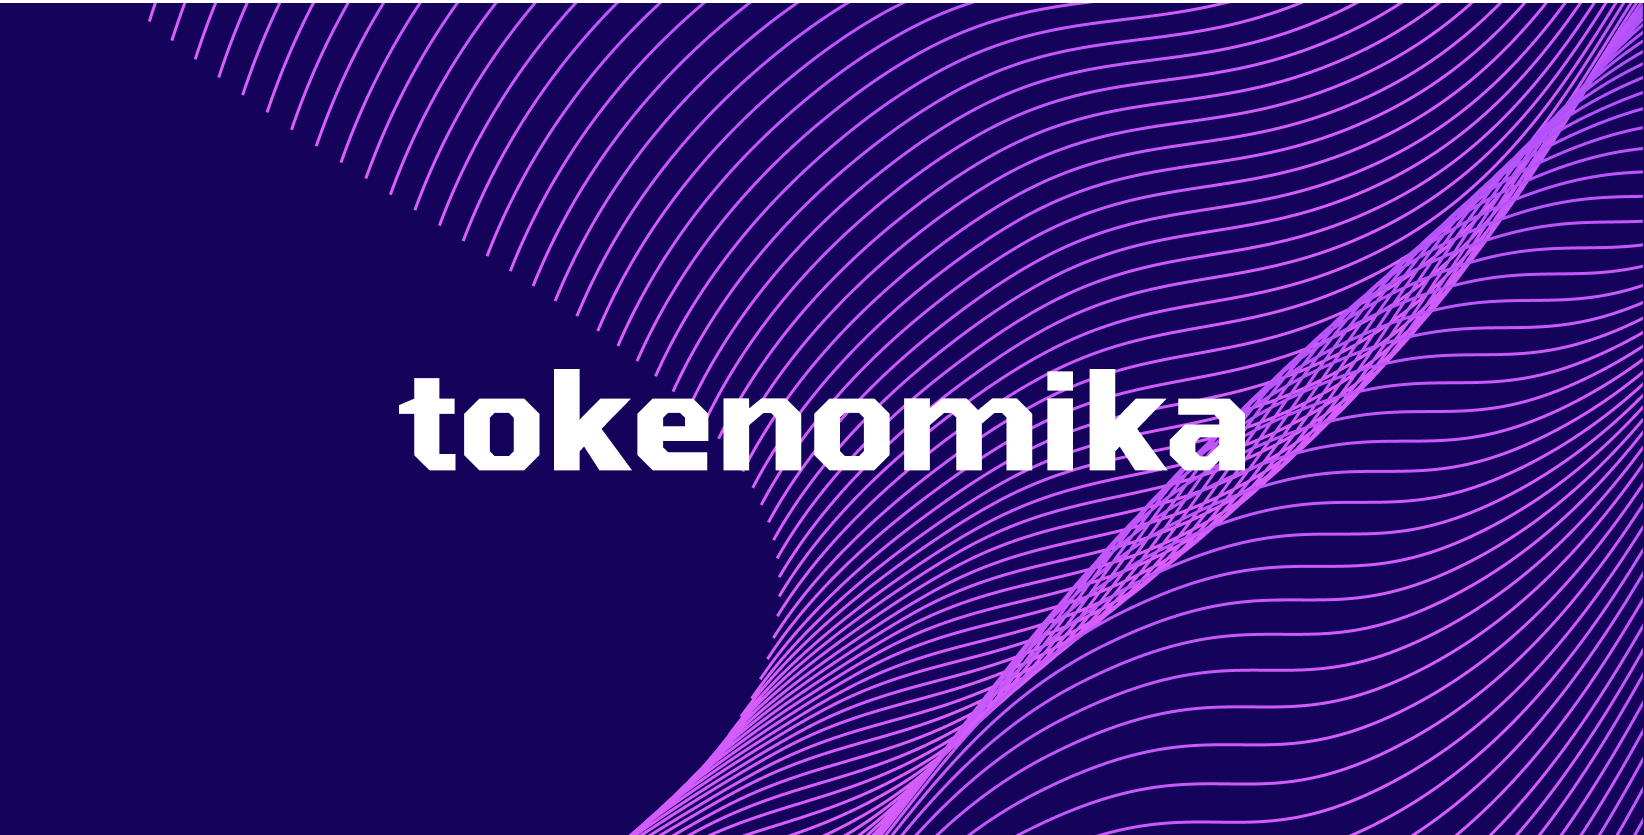 What is tokenomics and why is it so important?